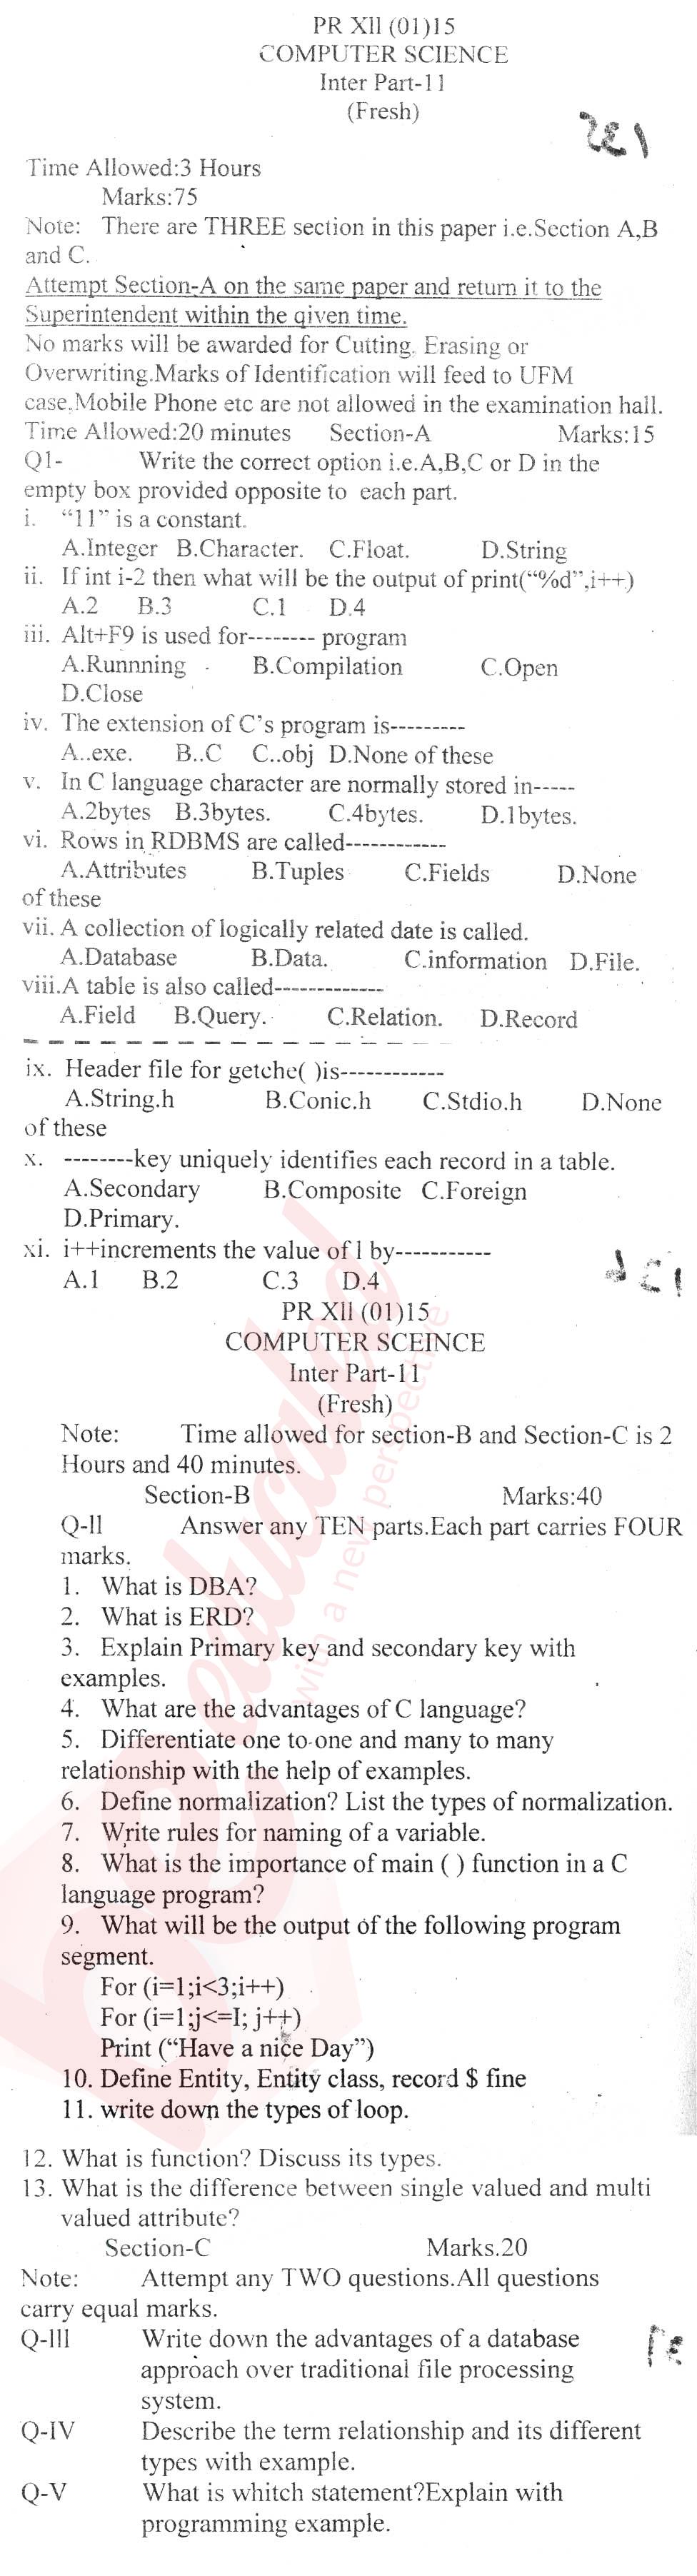 Computer Science ICS Part 2 Past Paper Group 1 BISE Bannu 2015